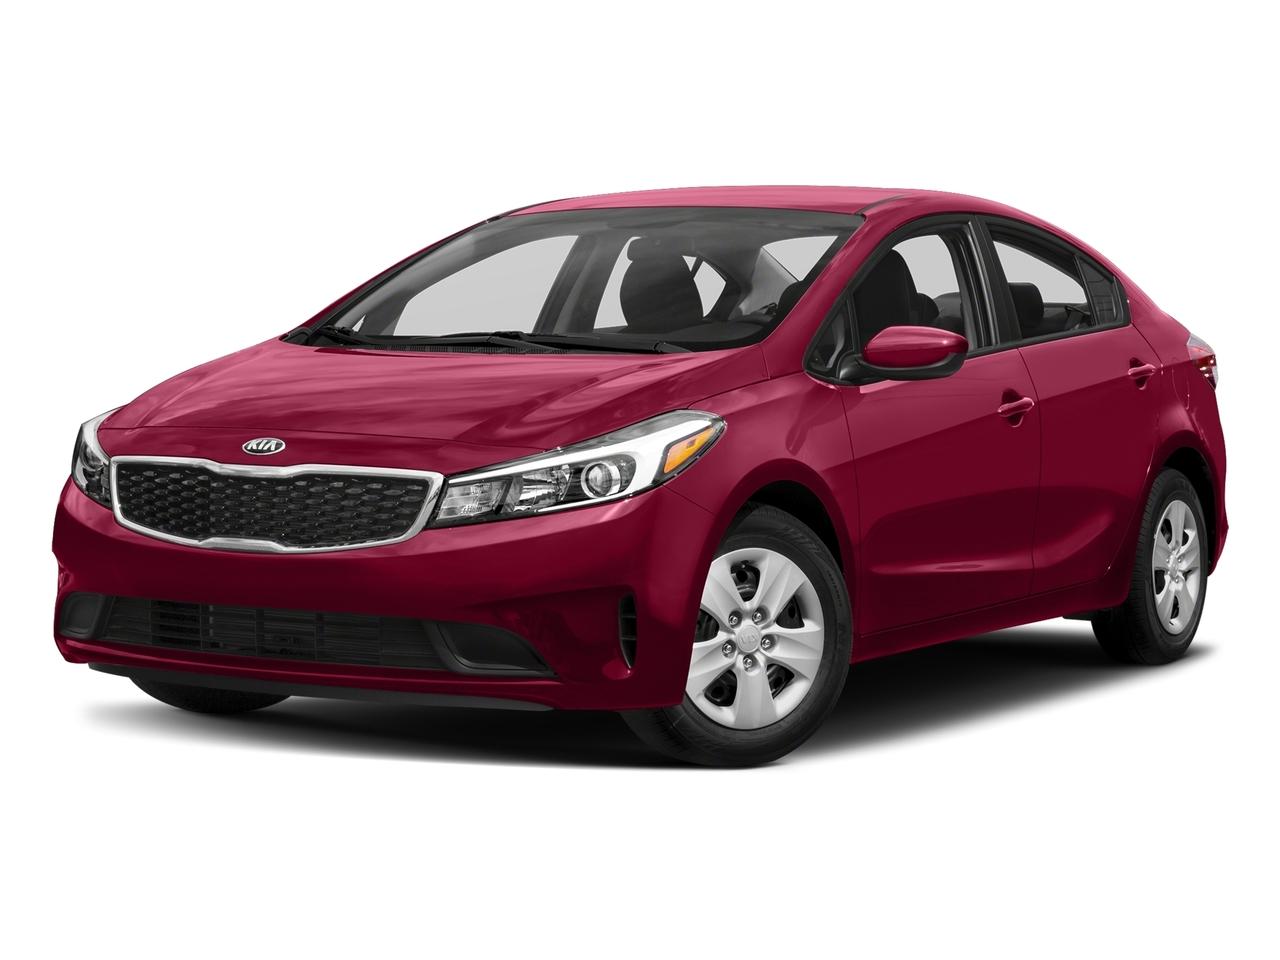 Used 2017 Kia Forte LX with VIN 3KPFK4A77HE043454 for sale in Laramie, WY